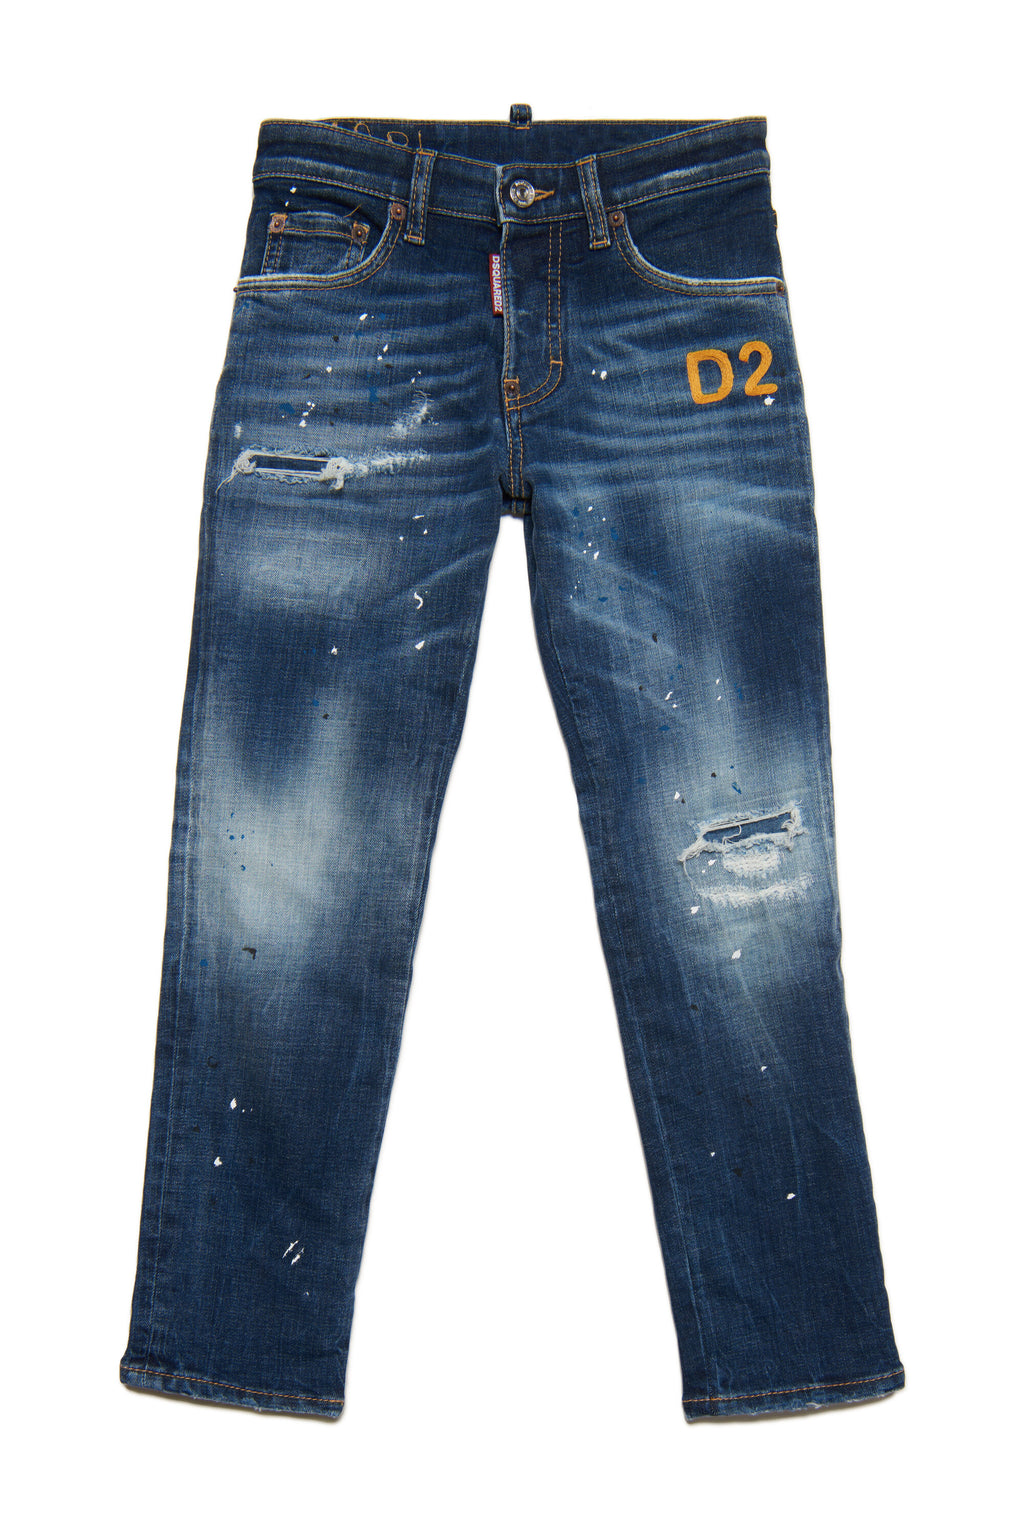 Stanislav jeans straight medium blue shaded with breaks and patches